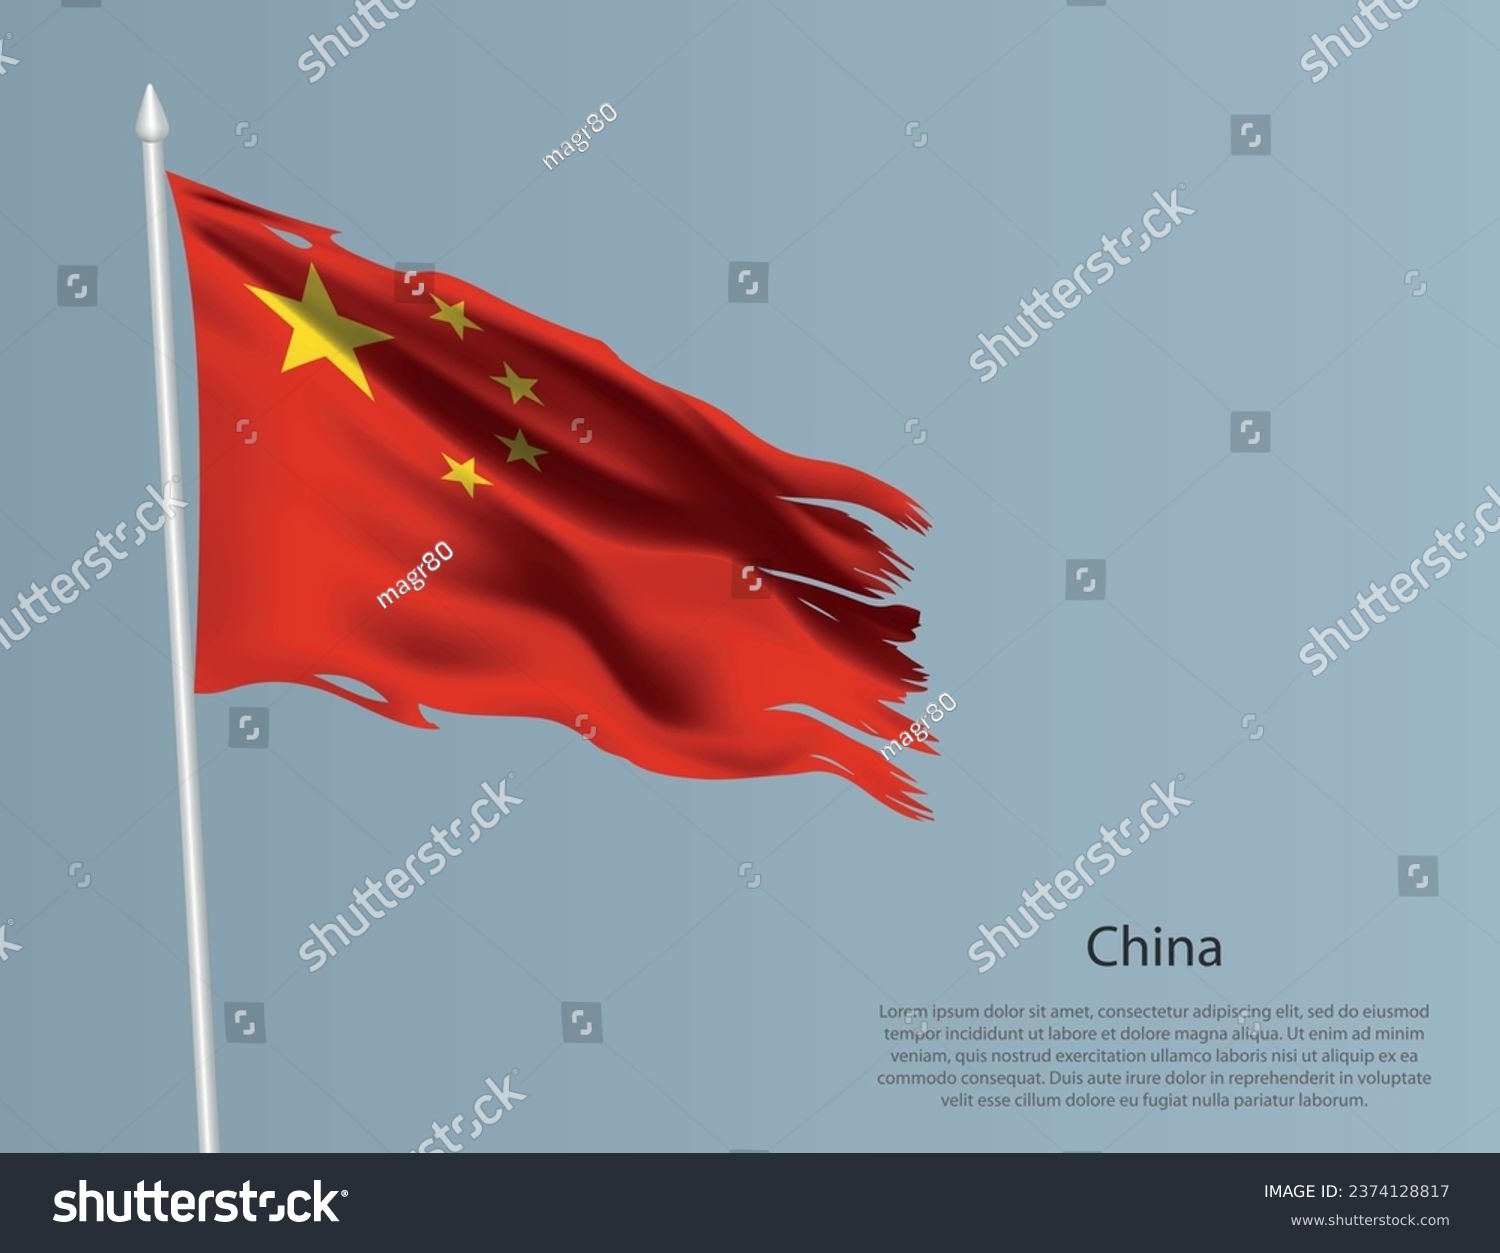 SVG of Ragged national flag of China. Wavy torn fabric on blue background. Realistic vector illustration svg